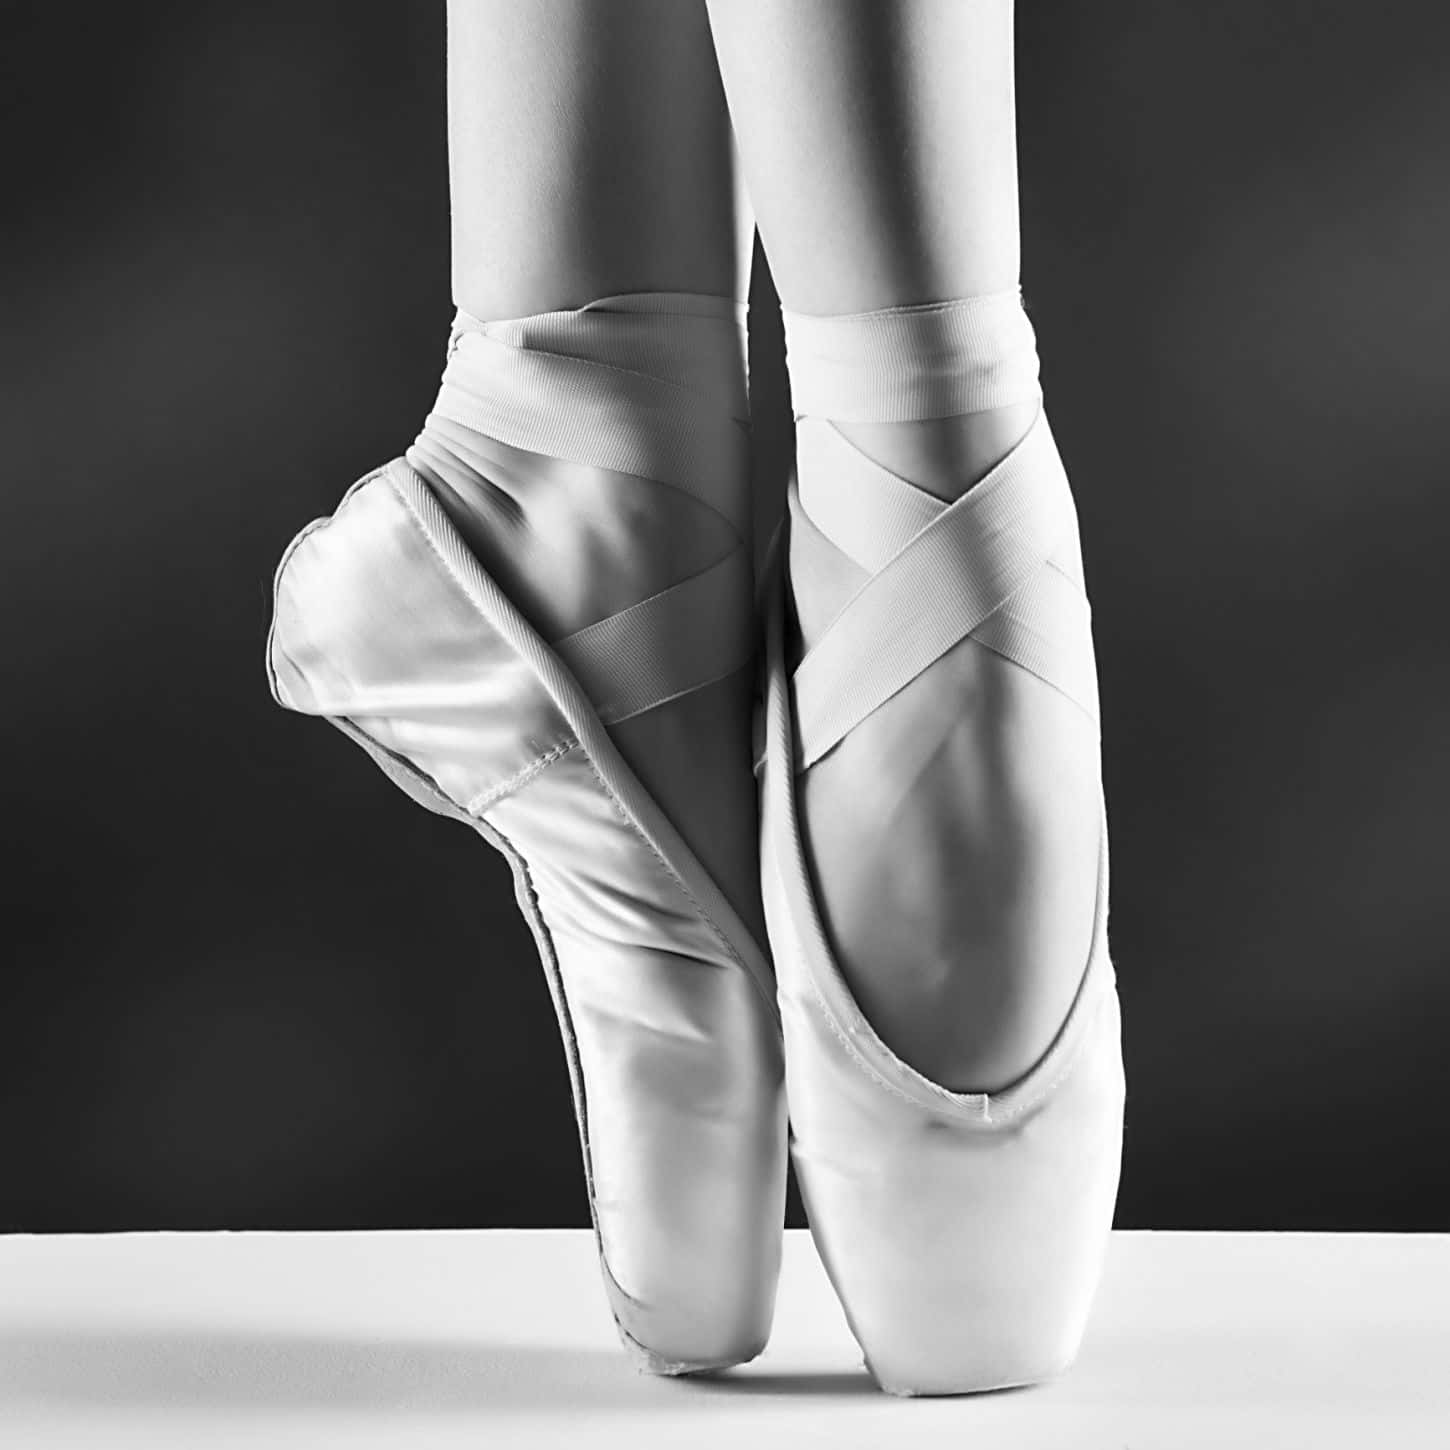 A Woman's Ballet Shoes Are Shown In Black And White Wallpaper